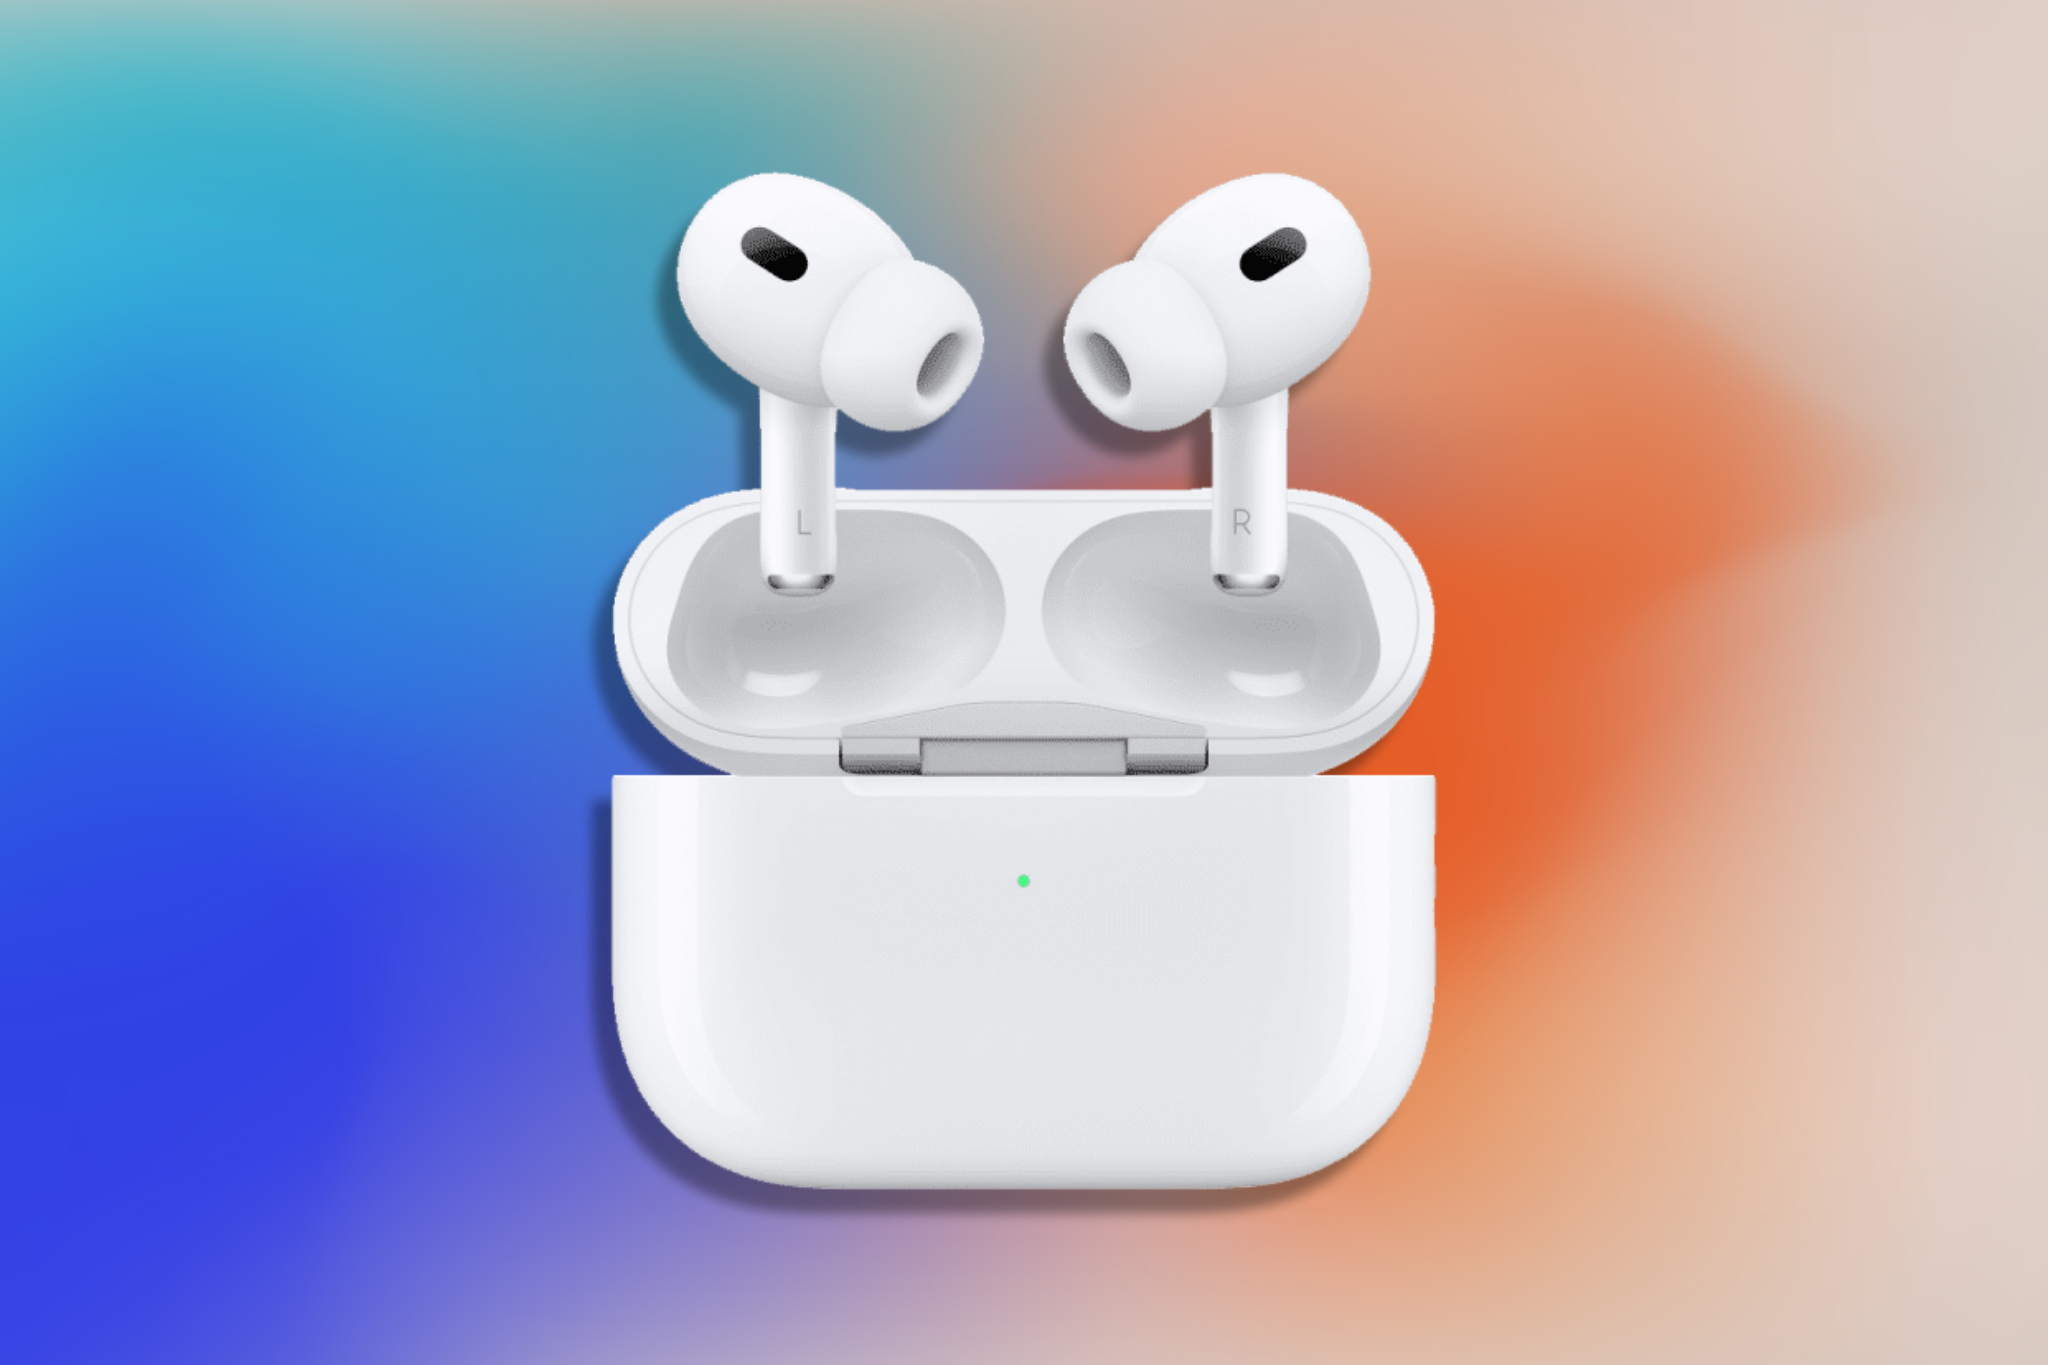 Apple AirPods pro 2 plummet to lowest price ever | The Independent